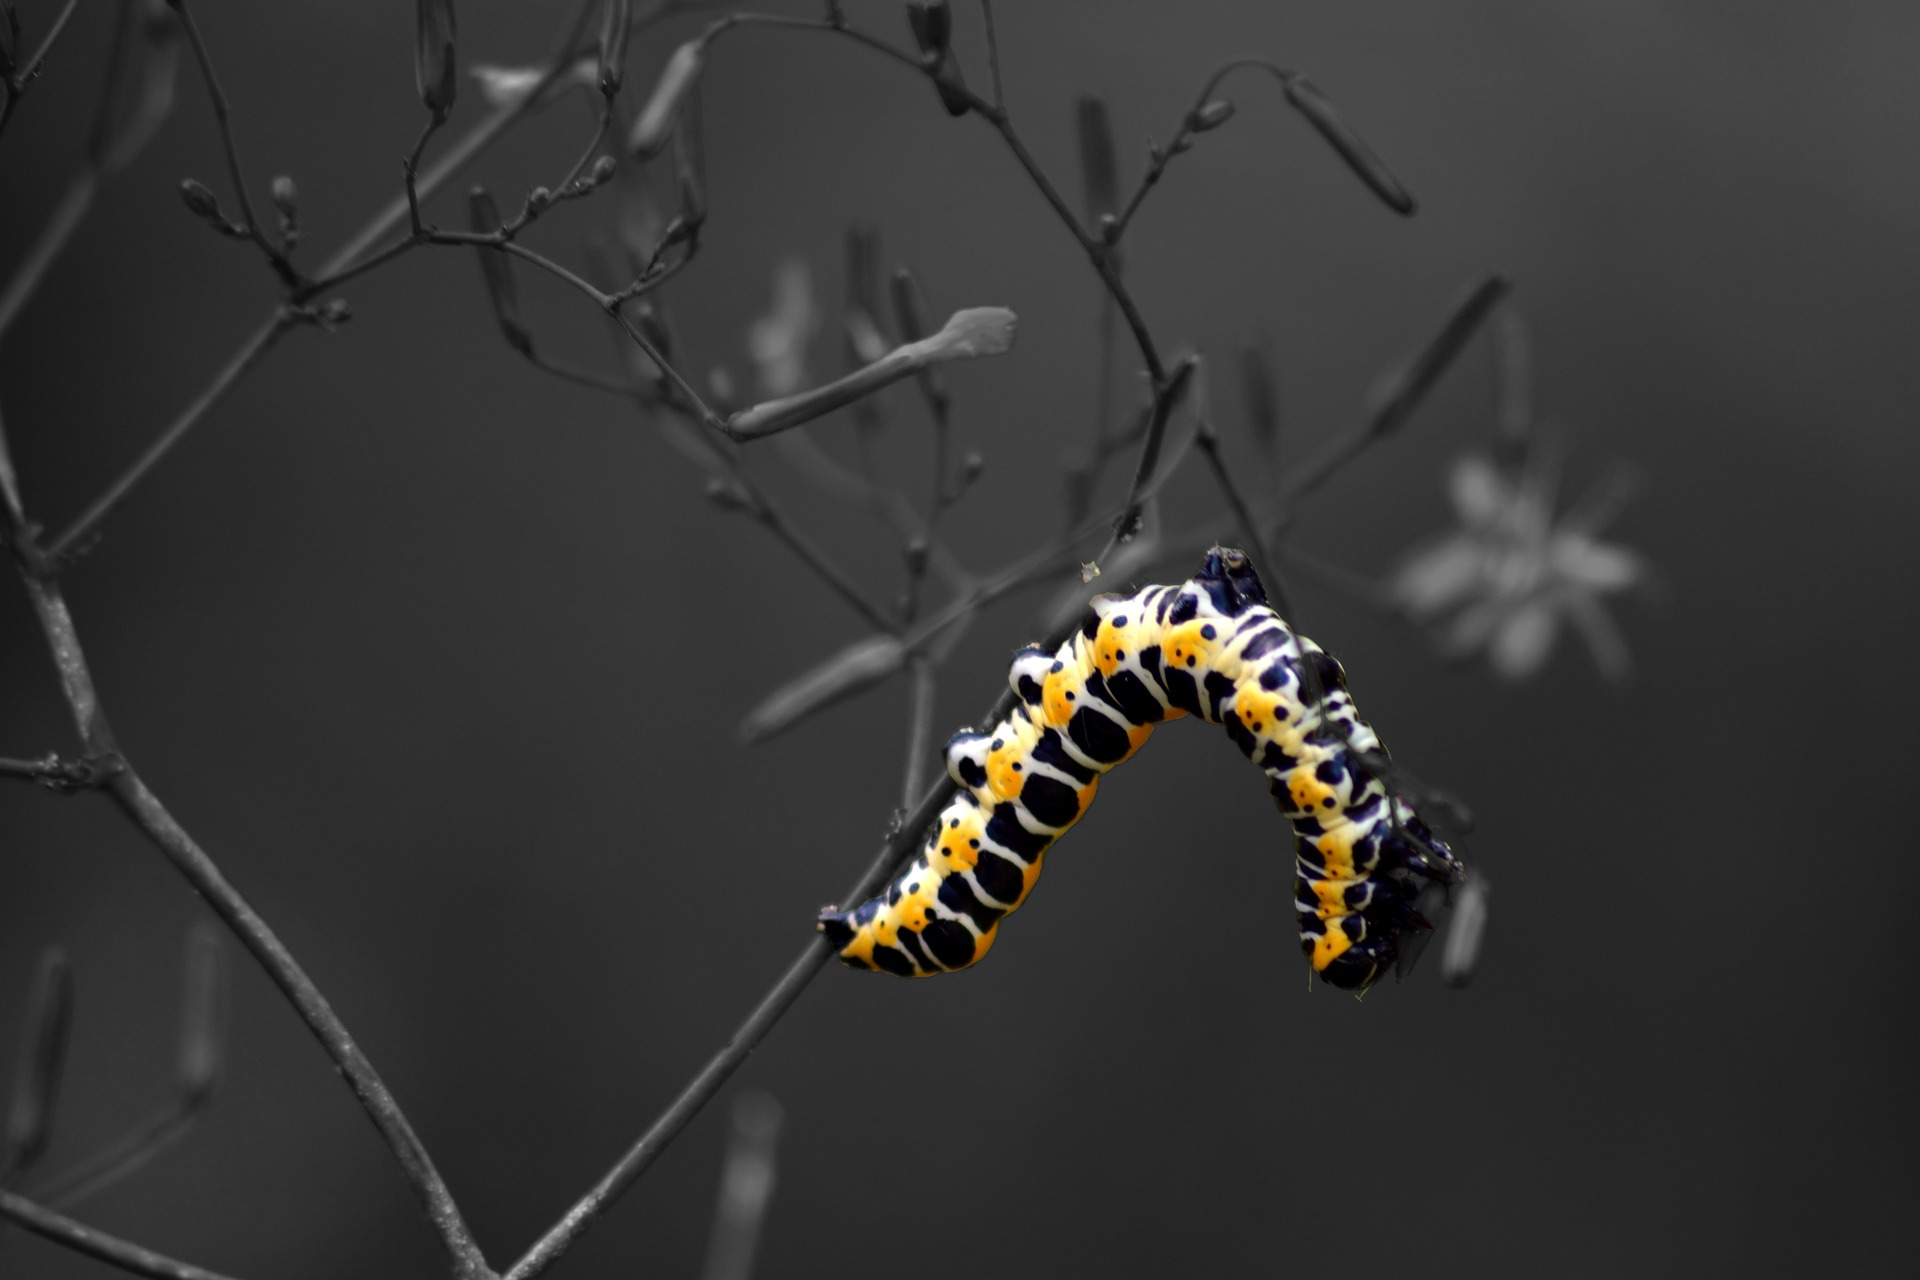 Caterpillar on a wire